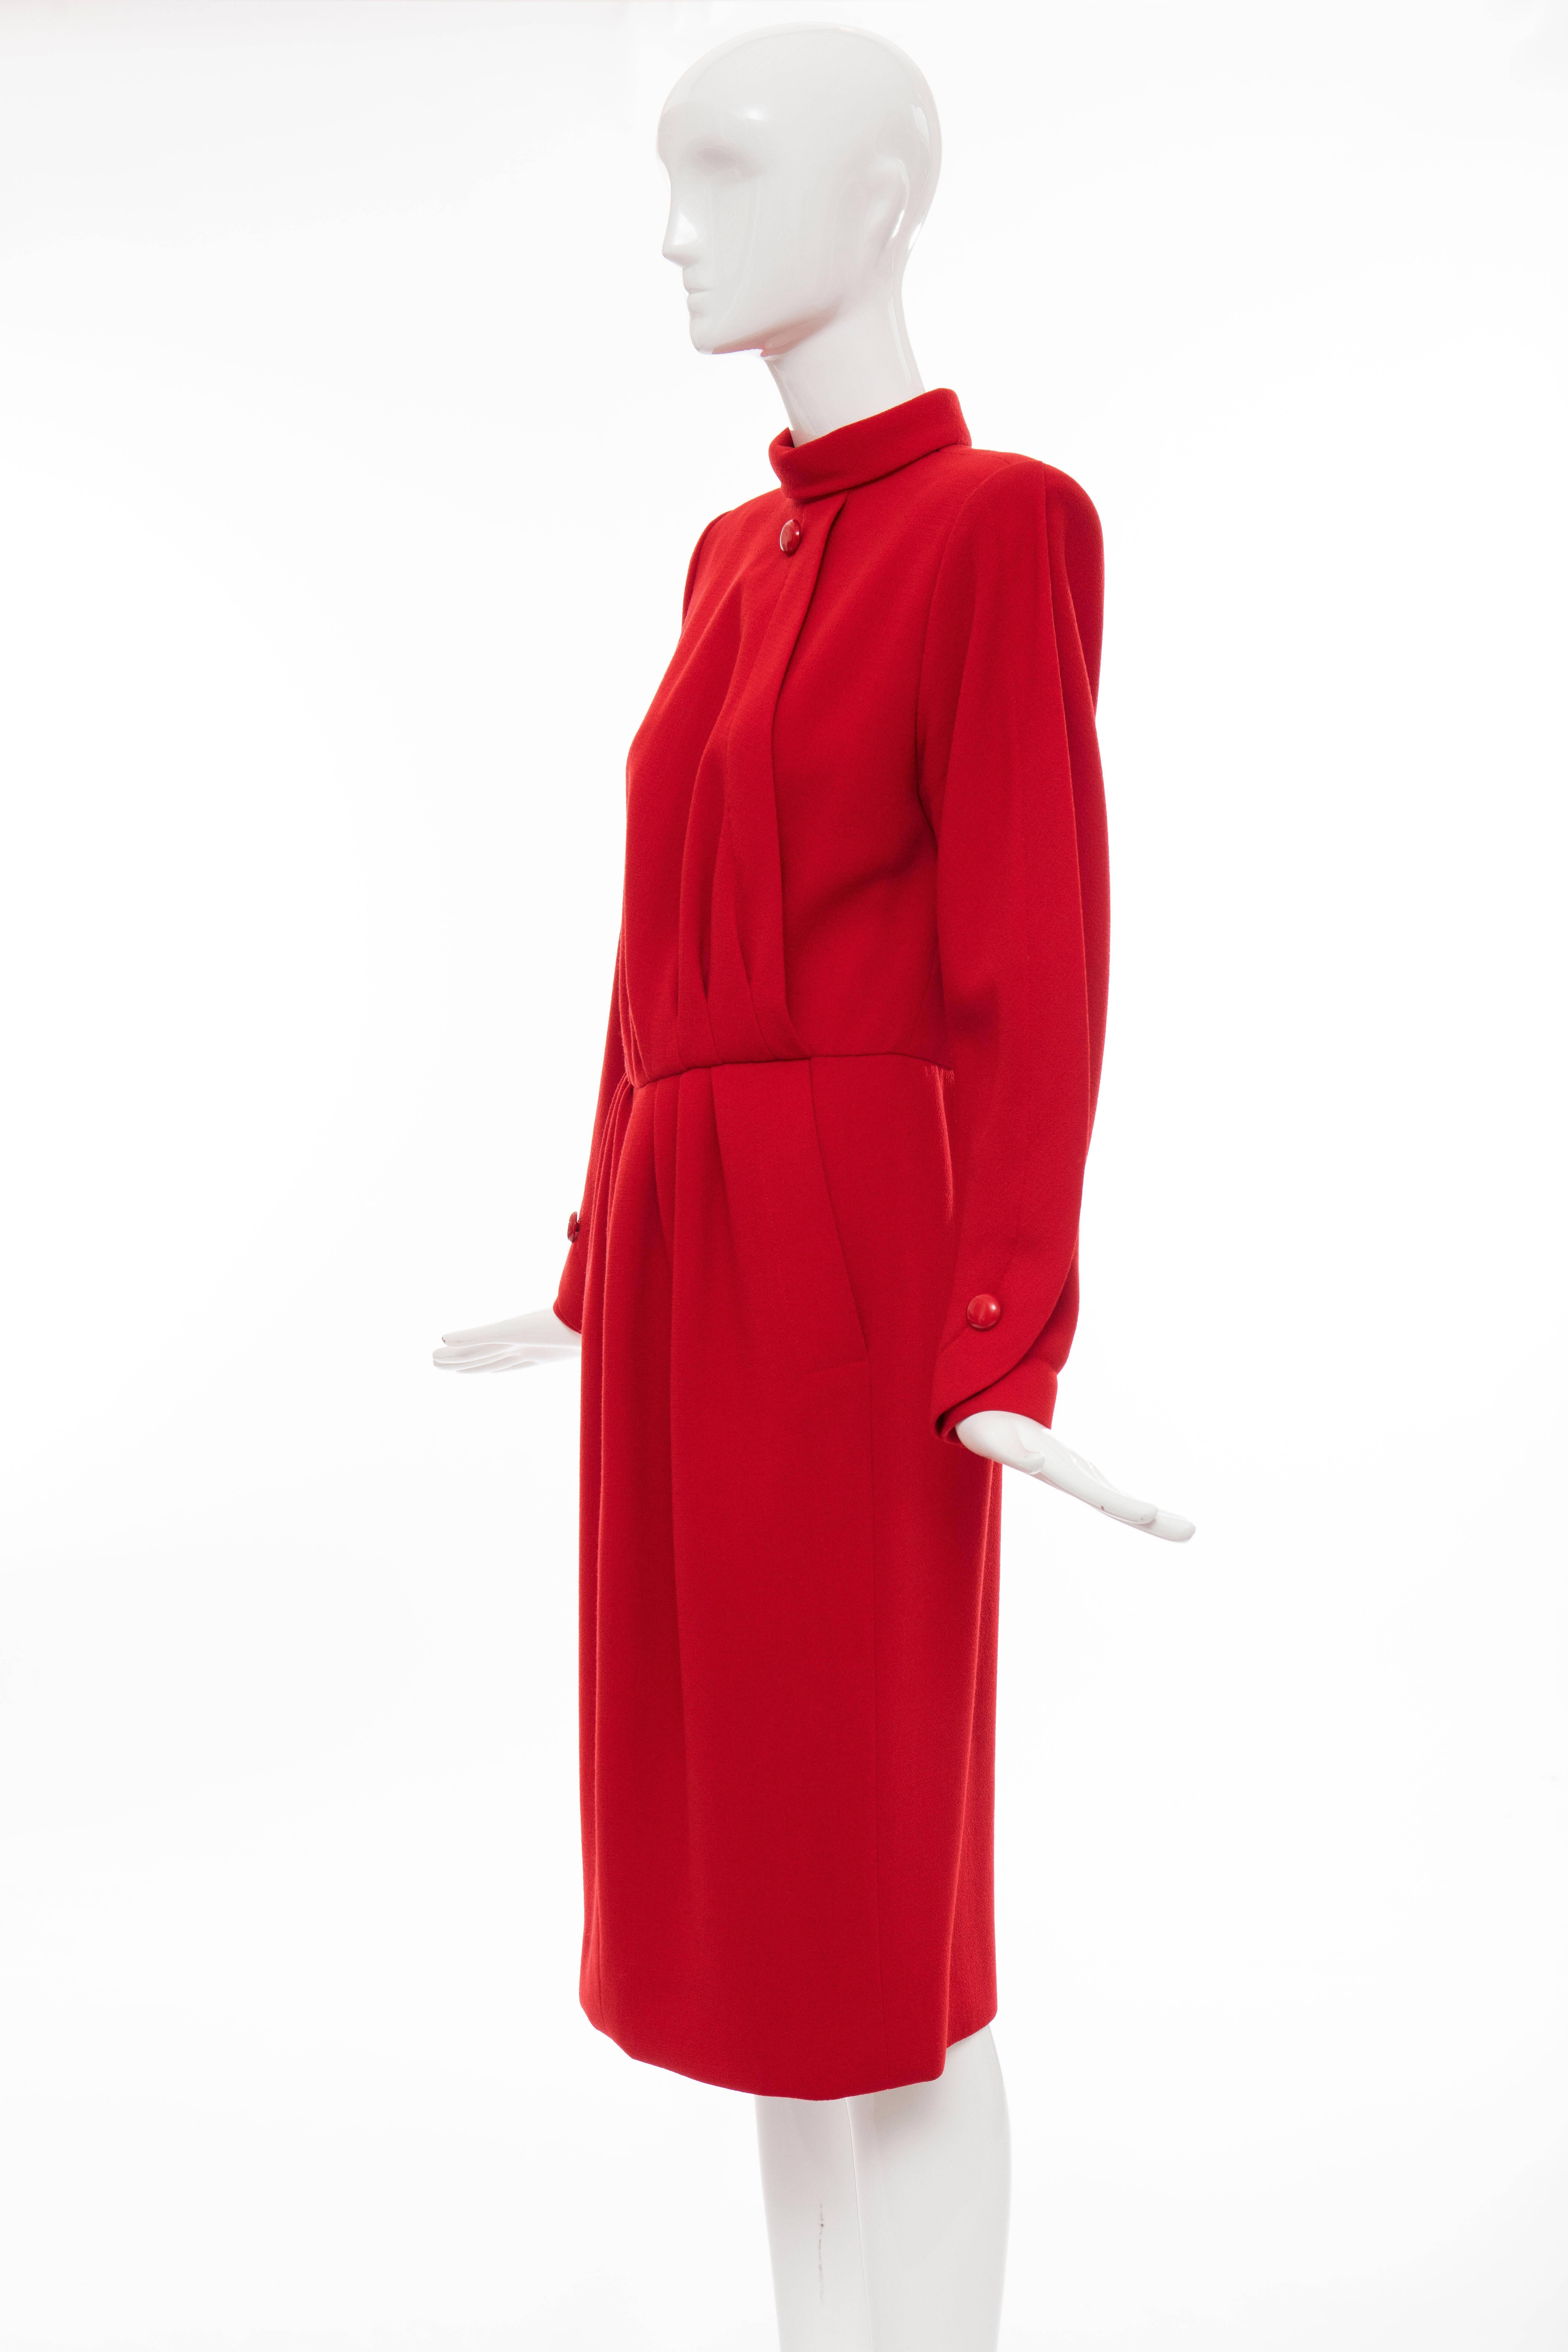 Nina Ricci Haute Couture Red Wool Crepe Dress, Circa 1980's For Sale 4